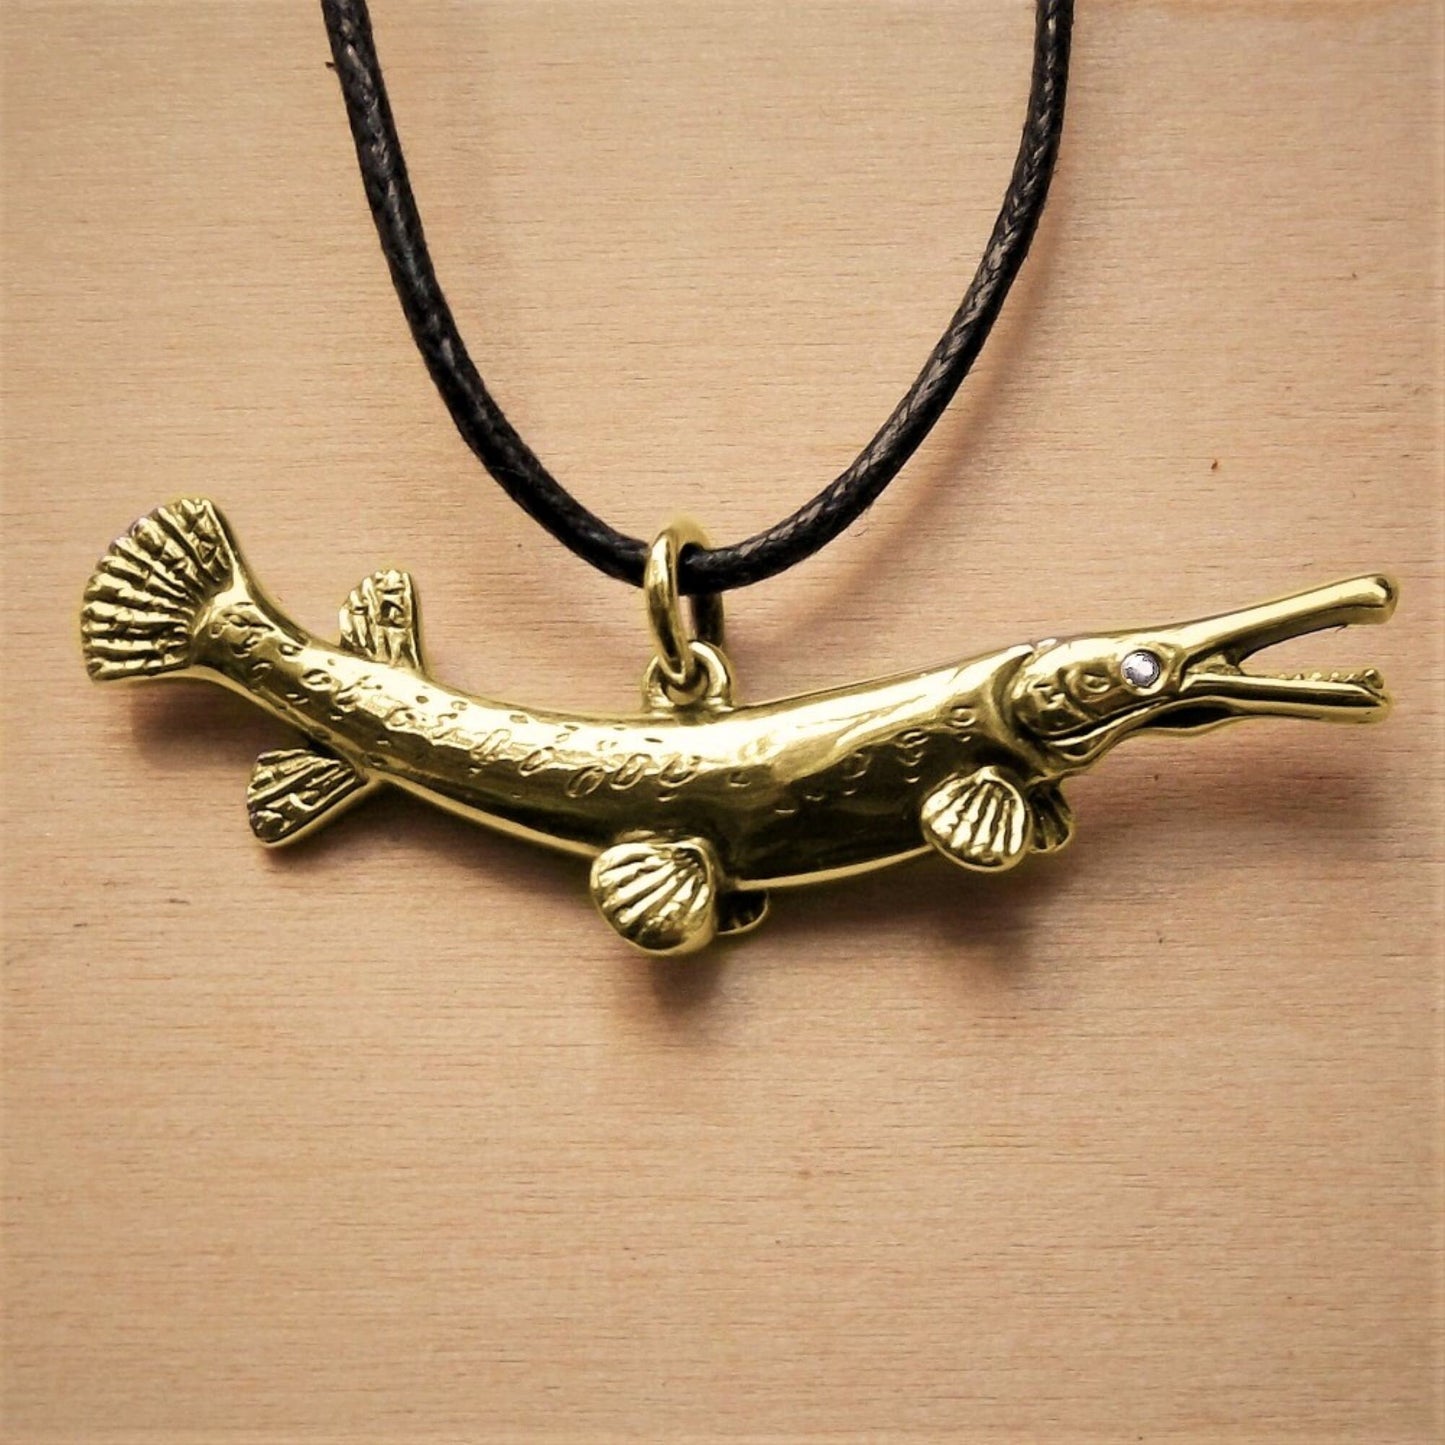 Gold gar necklace, garpike, or alligator gar fishing necklace, gold and diamond fisherman's charm pendant, made to order. © Adrian Ashley